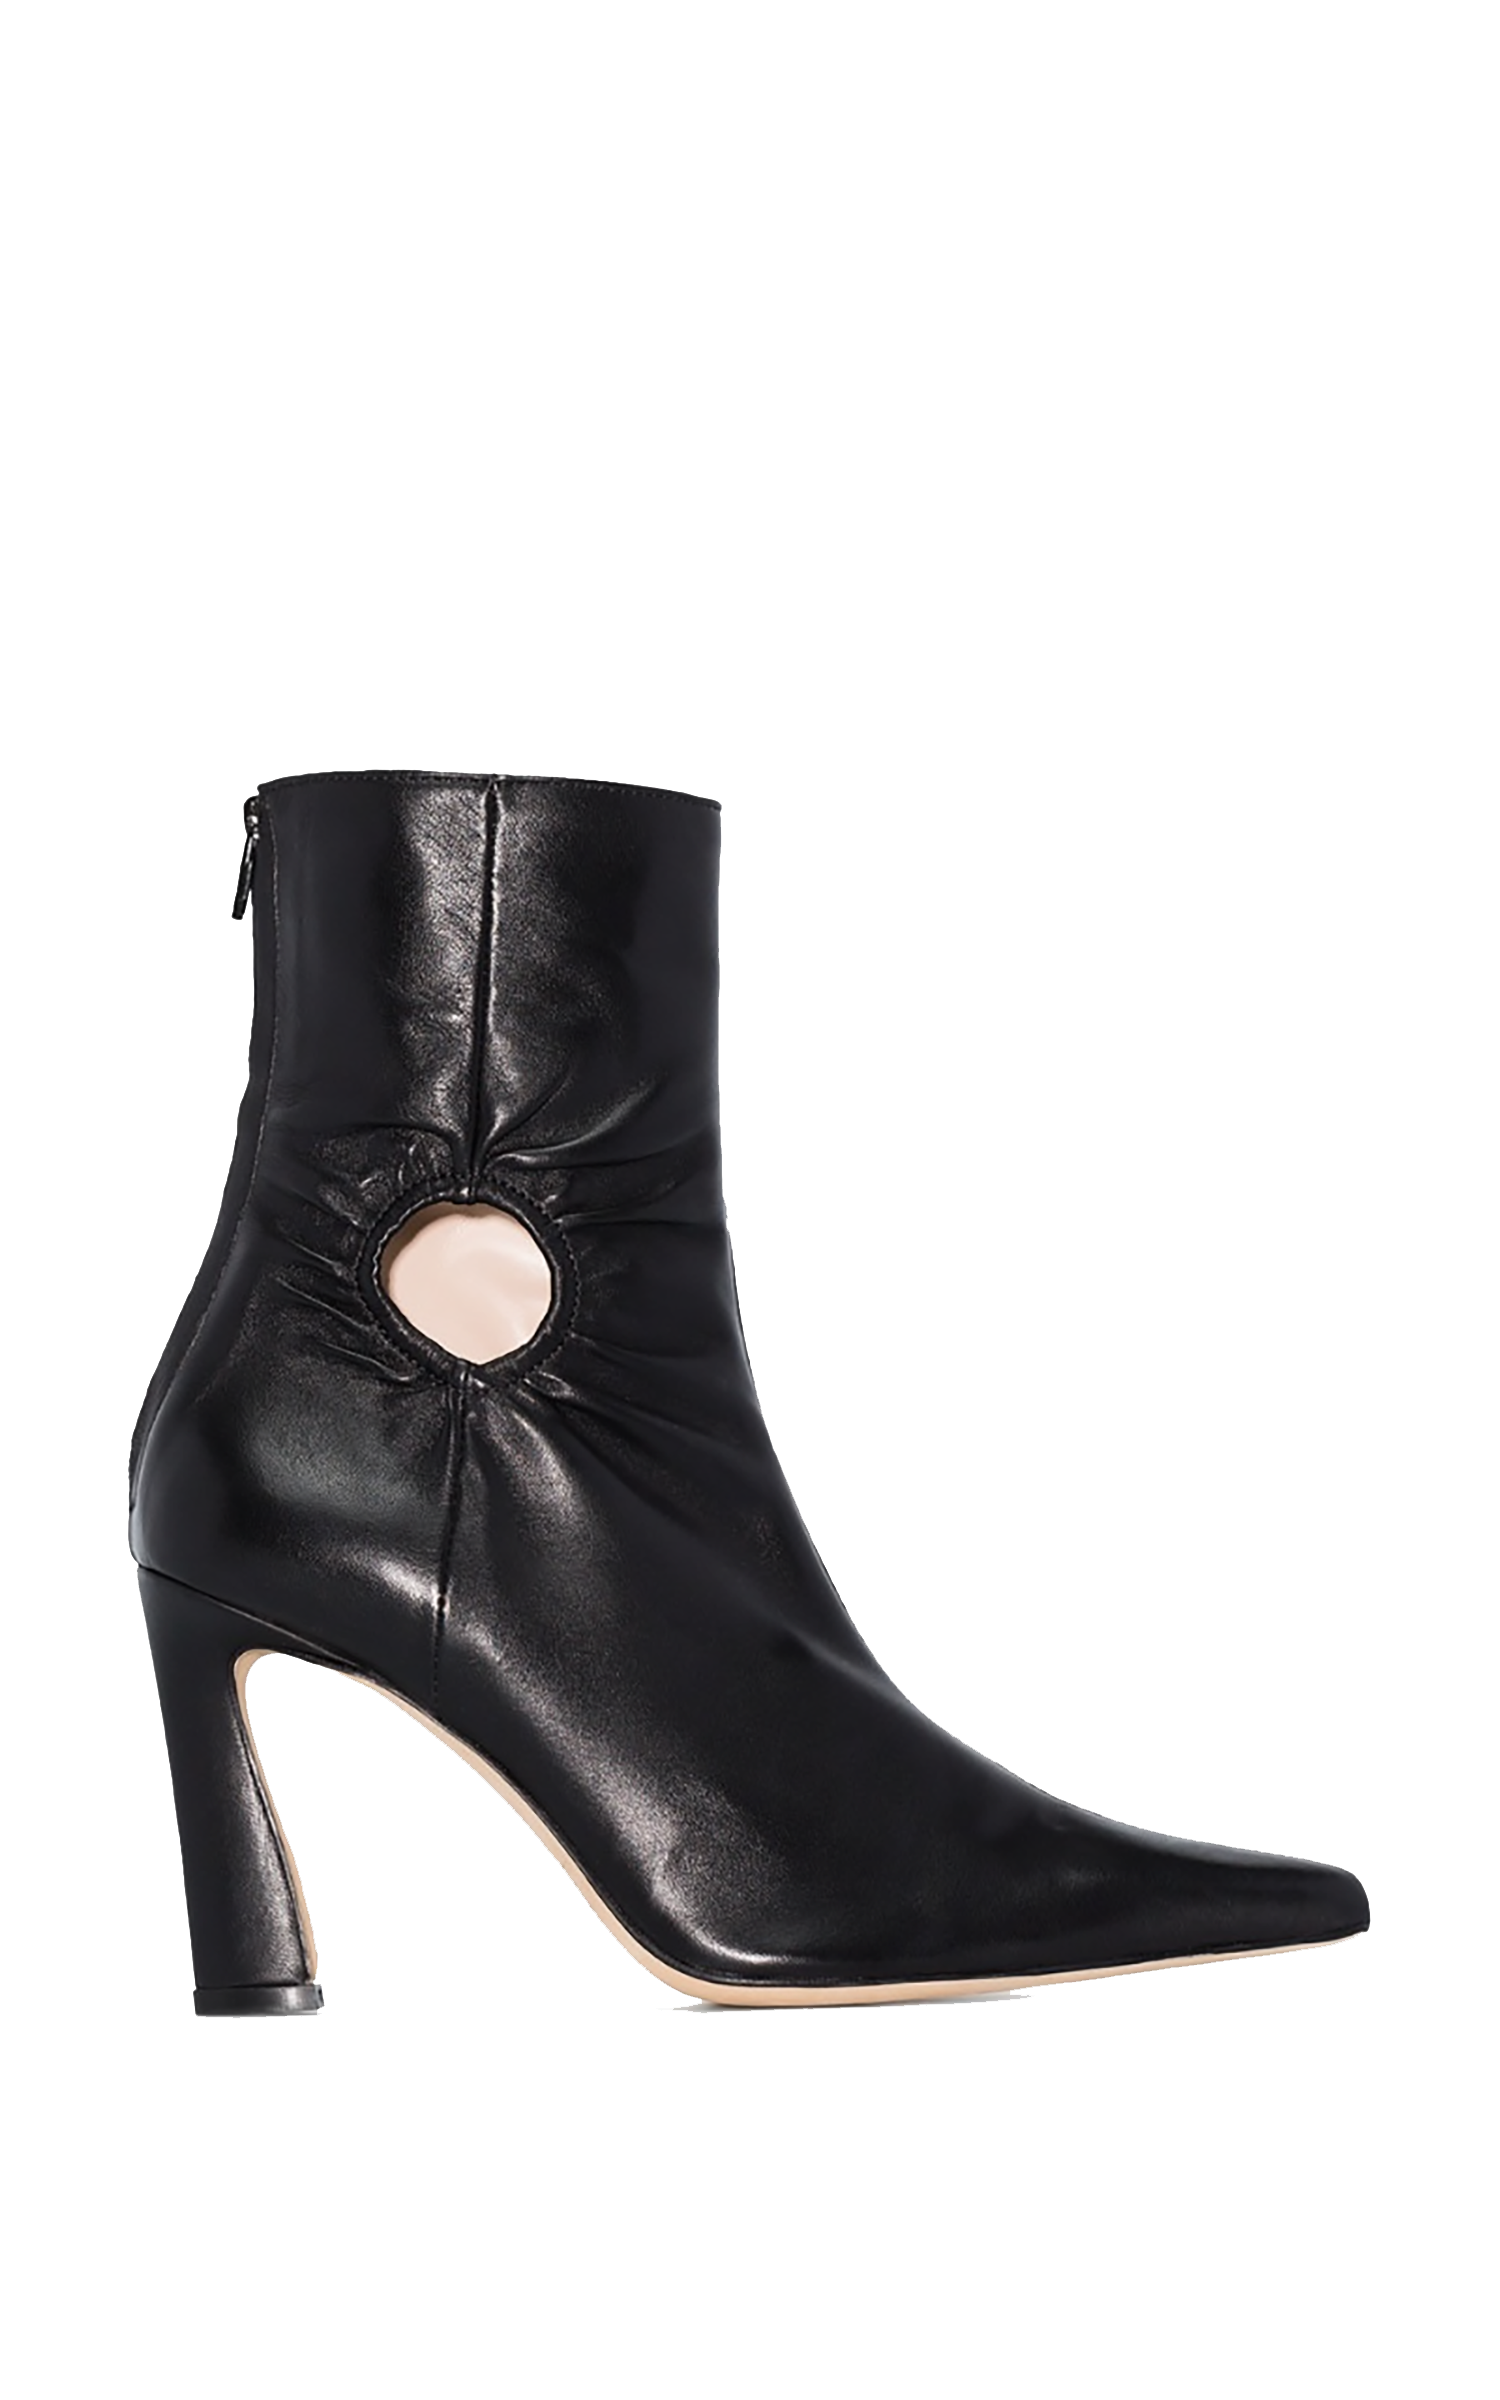 kalda-black-fory-80-leather-ankle-boots_14519104_23501217_800_jpg.png